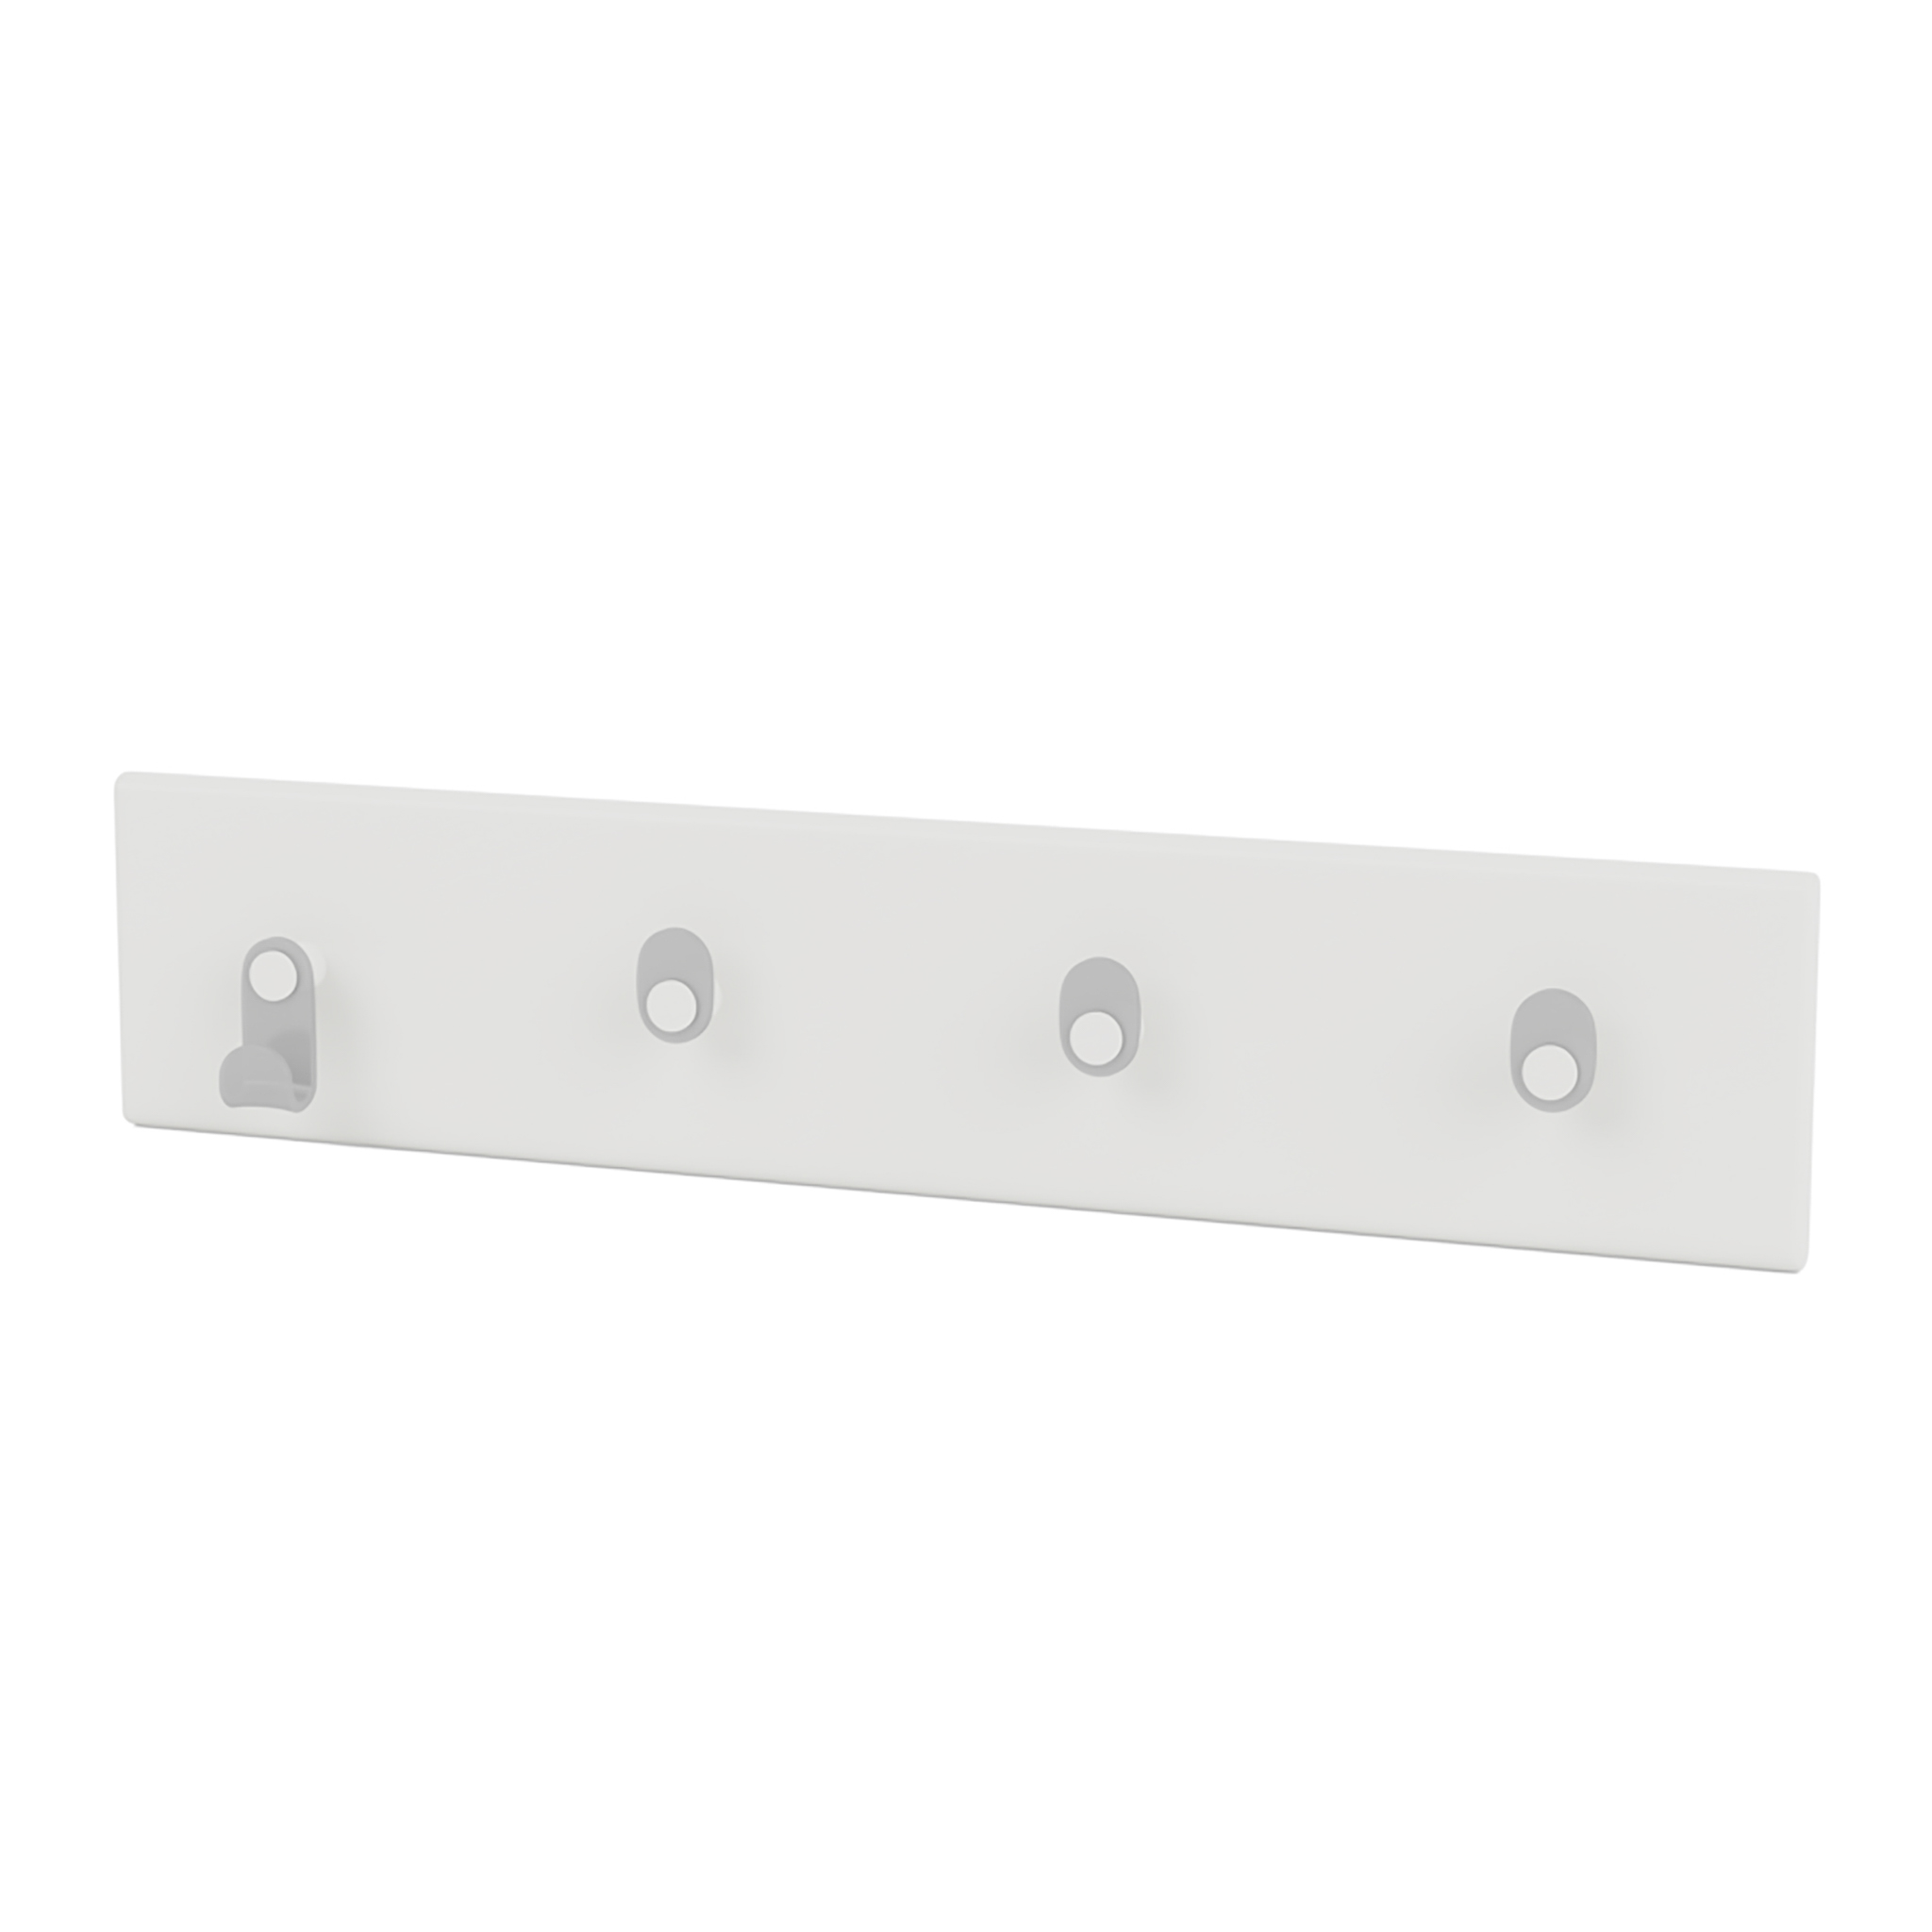 MONTANA // K812 - HOOK RAIL WITH FOUR BUTTONS